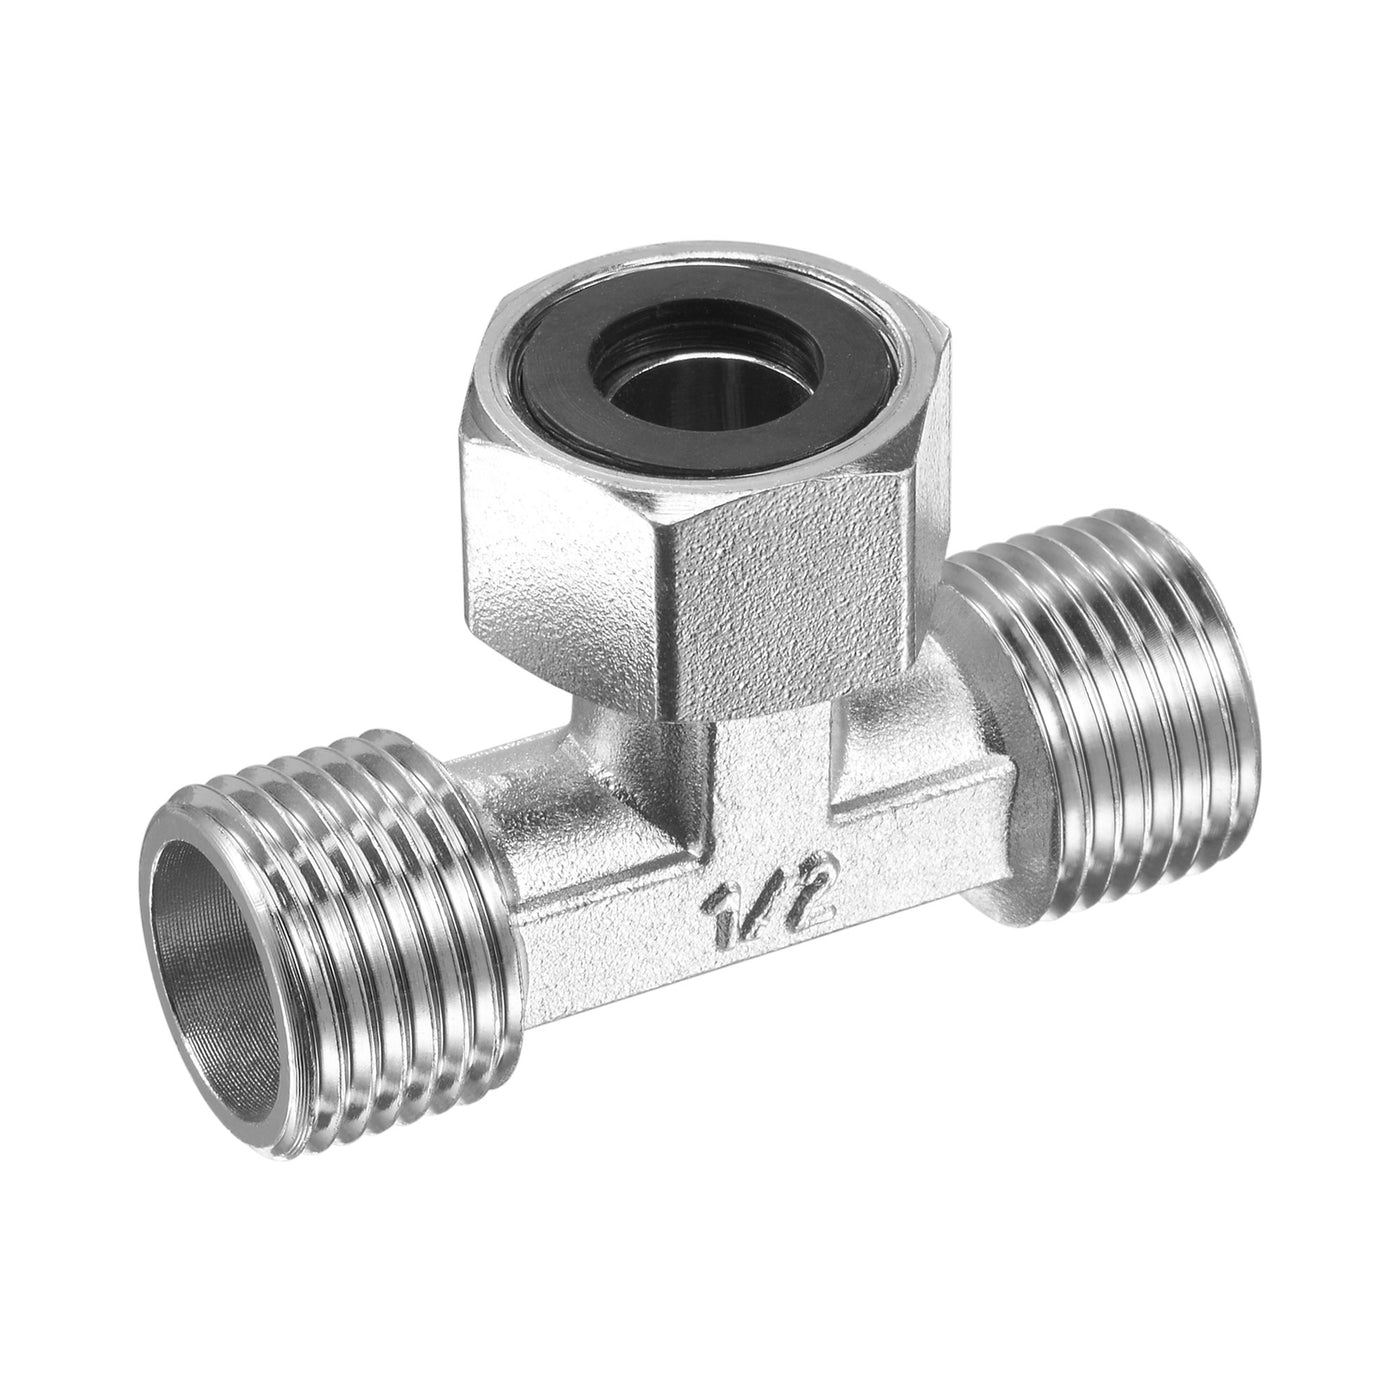 uxcell Uxcell Pipe Fitting Tee G1/2 2 Male to 1 Female Thread 3 Way T Shape Swivel Nut Hose Adapter Connector, Nickel-Plated Copper